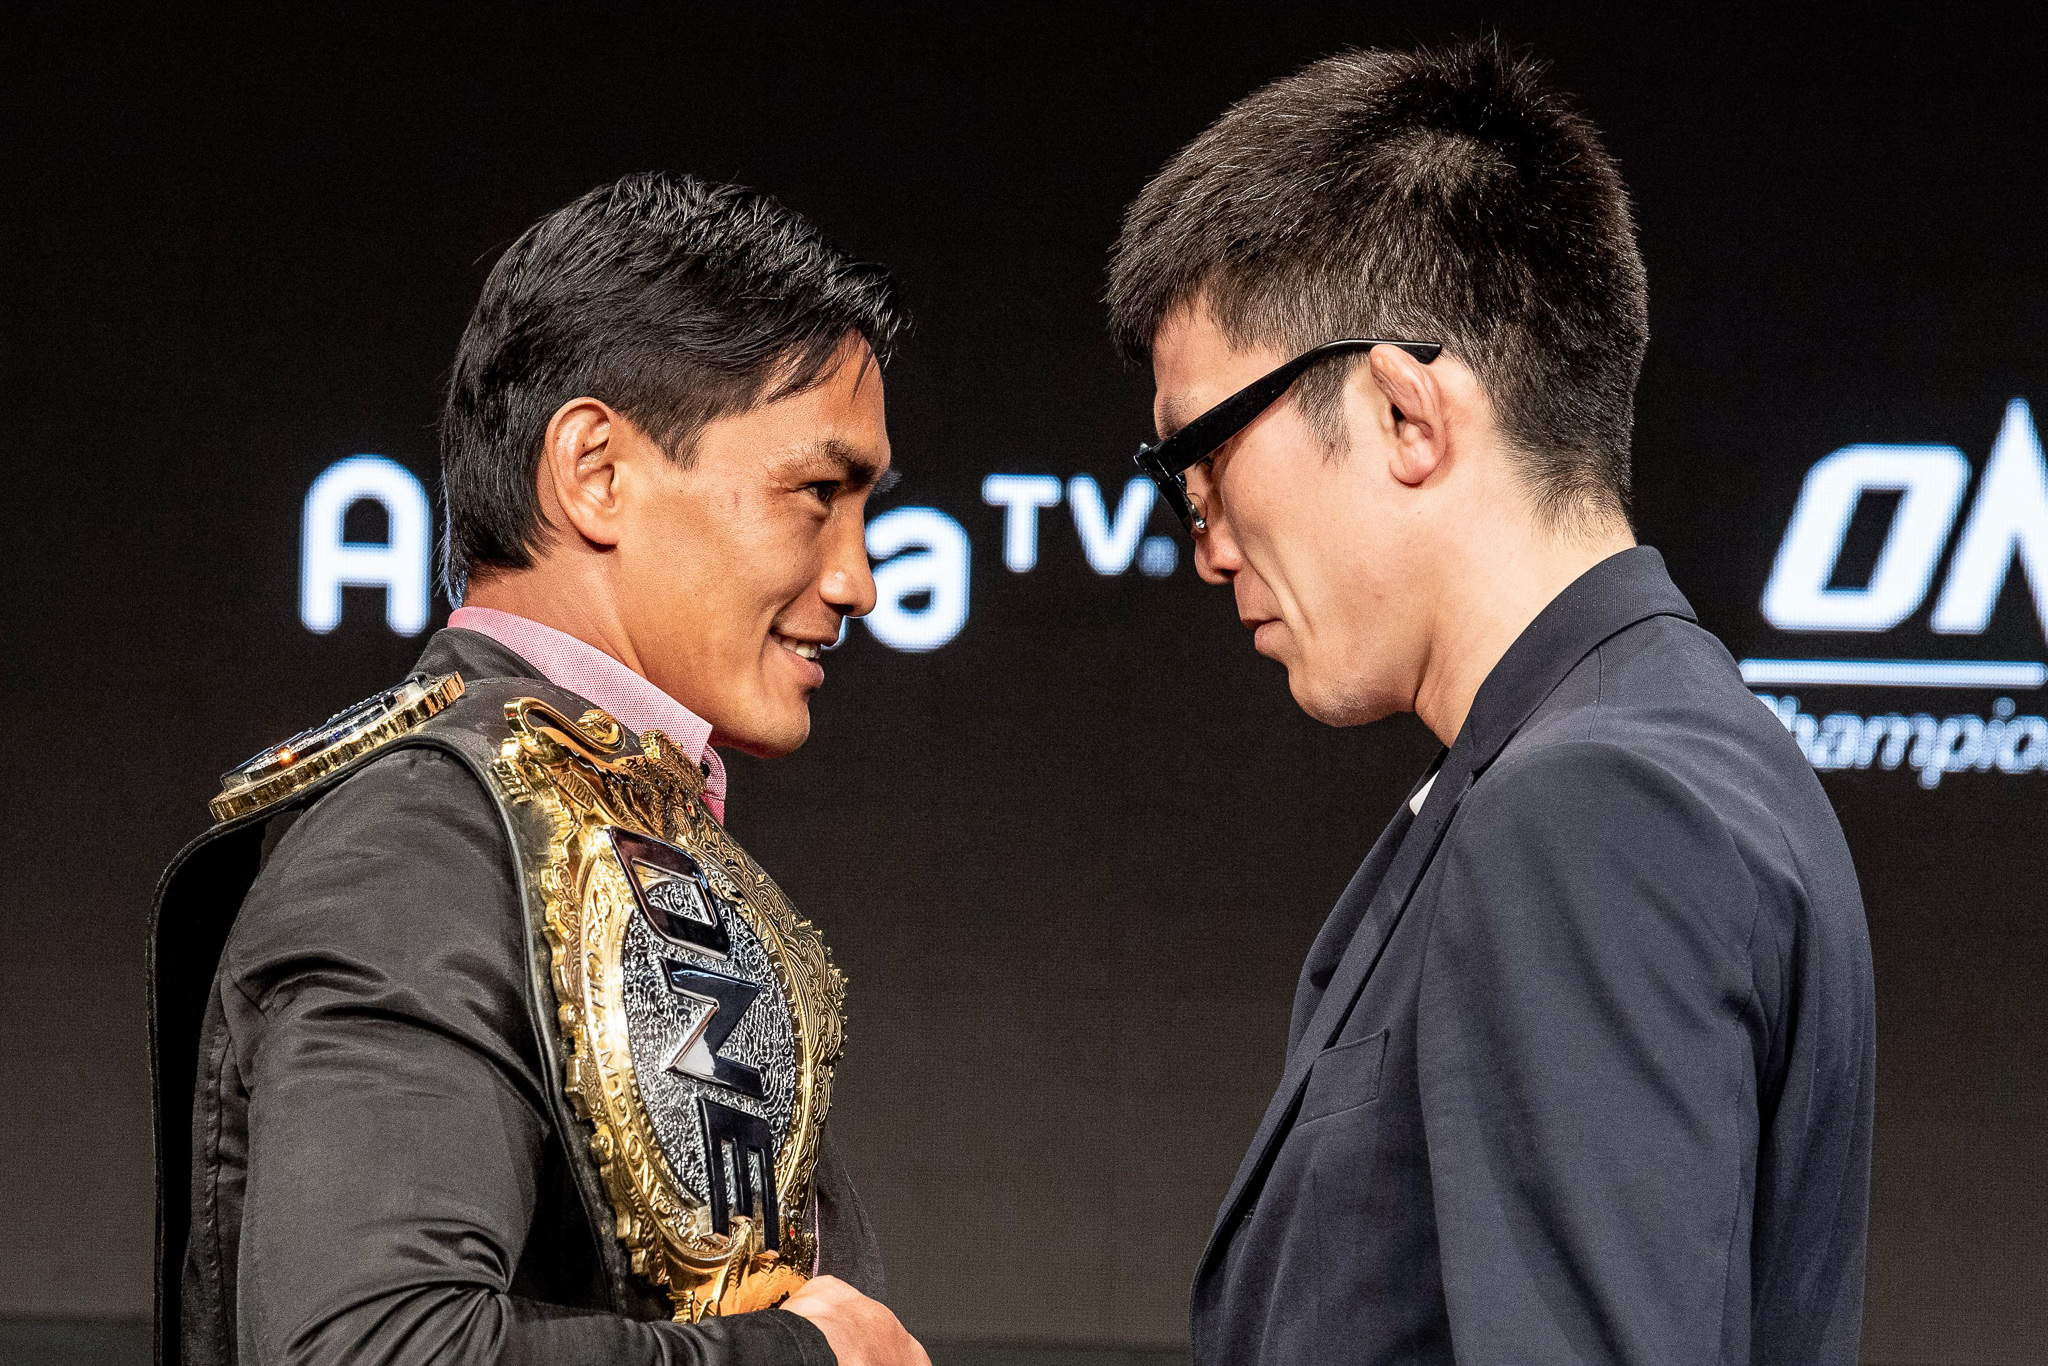 Eduard Folayang aims to finish Aoki in ONE trilogy bout